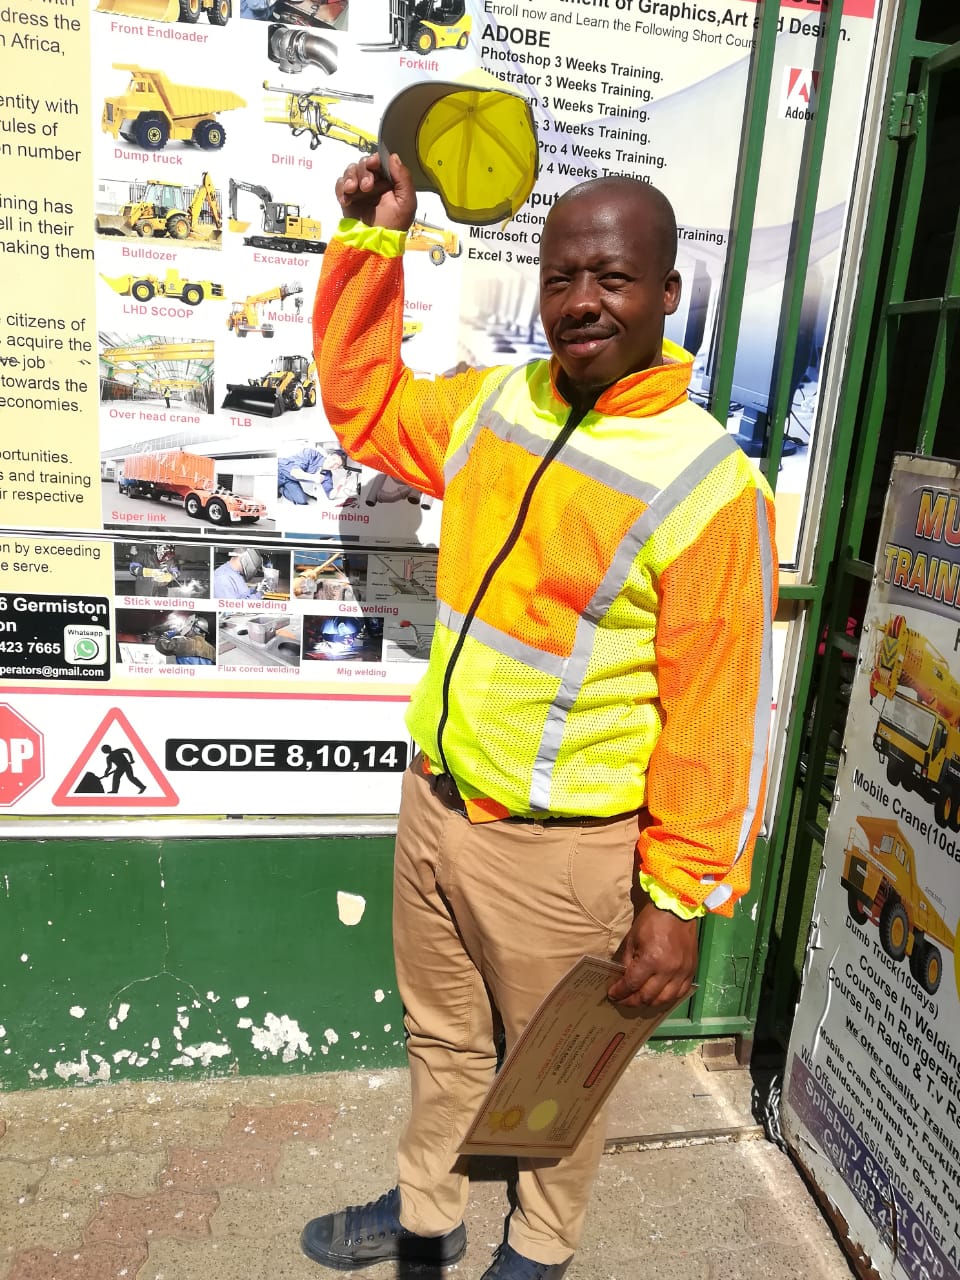 Mulani training sch for mobile crane, excavators, tlb, dump truck, in cape town and johannesburg